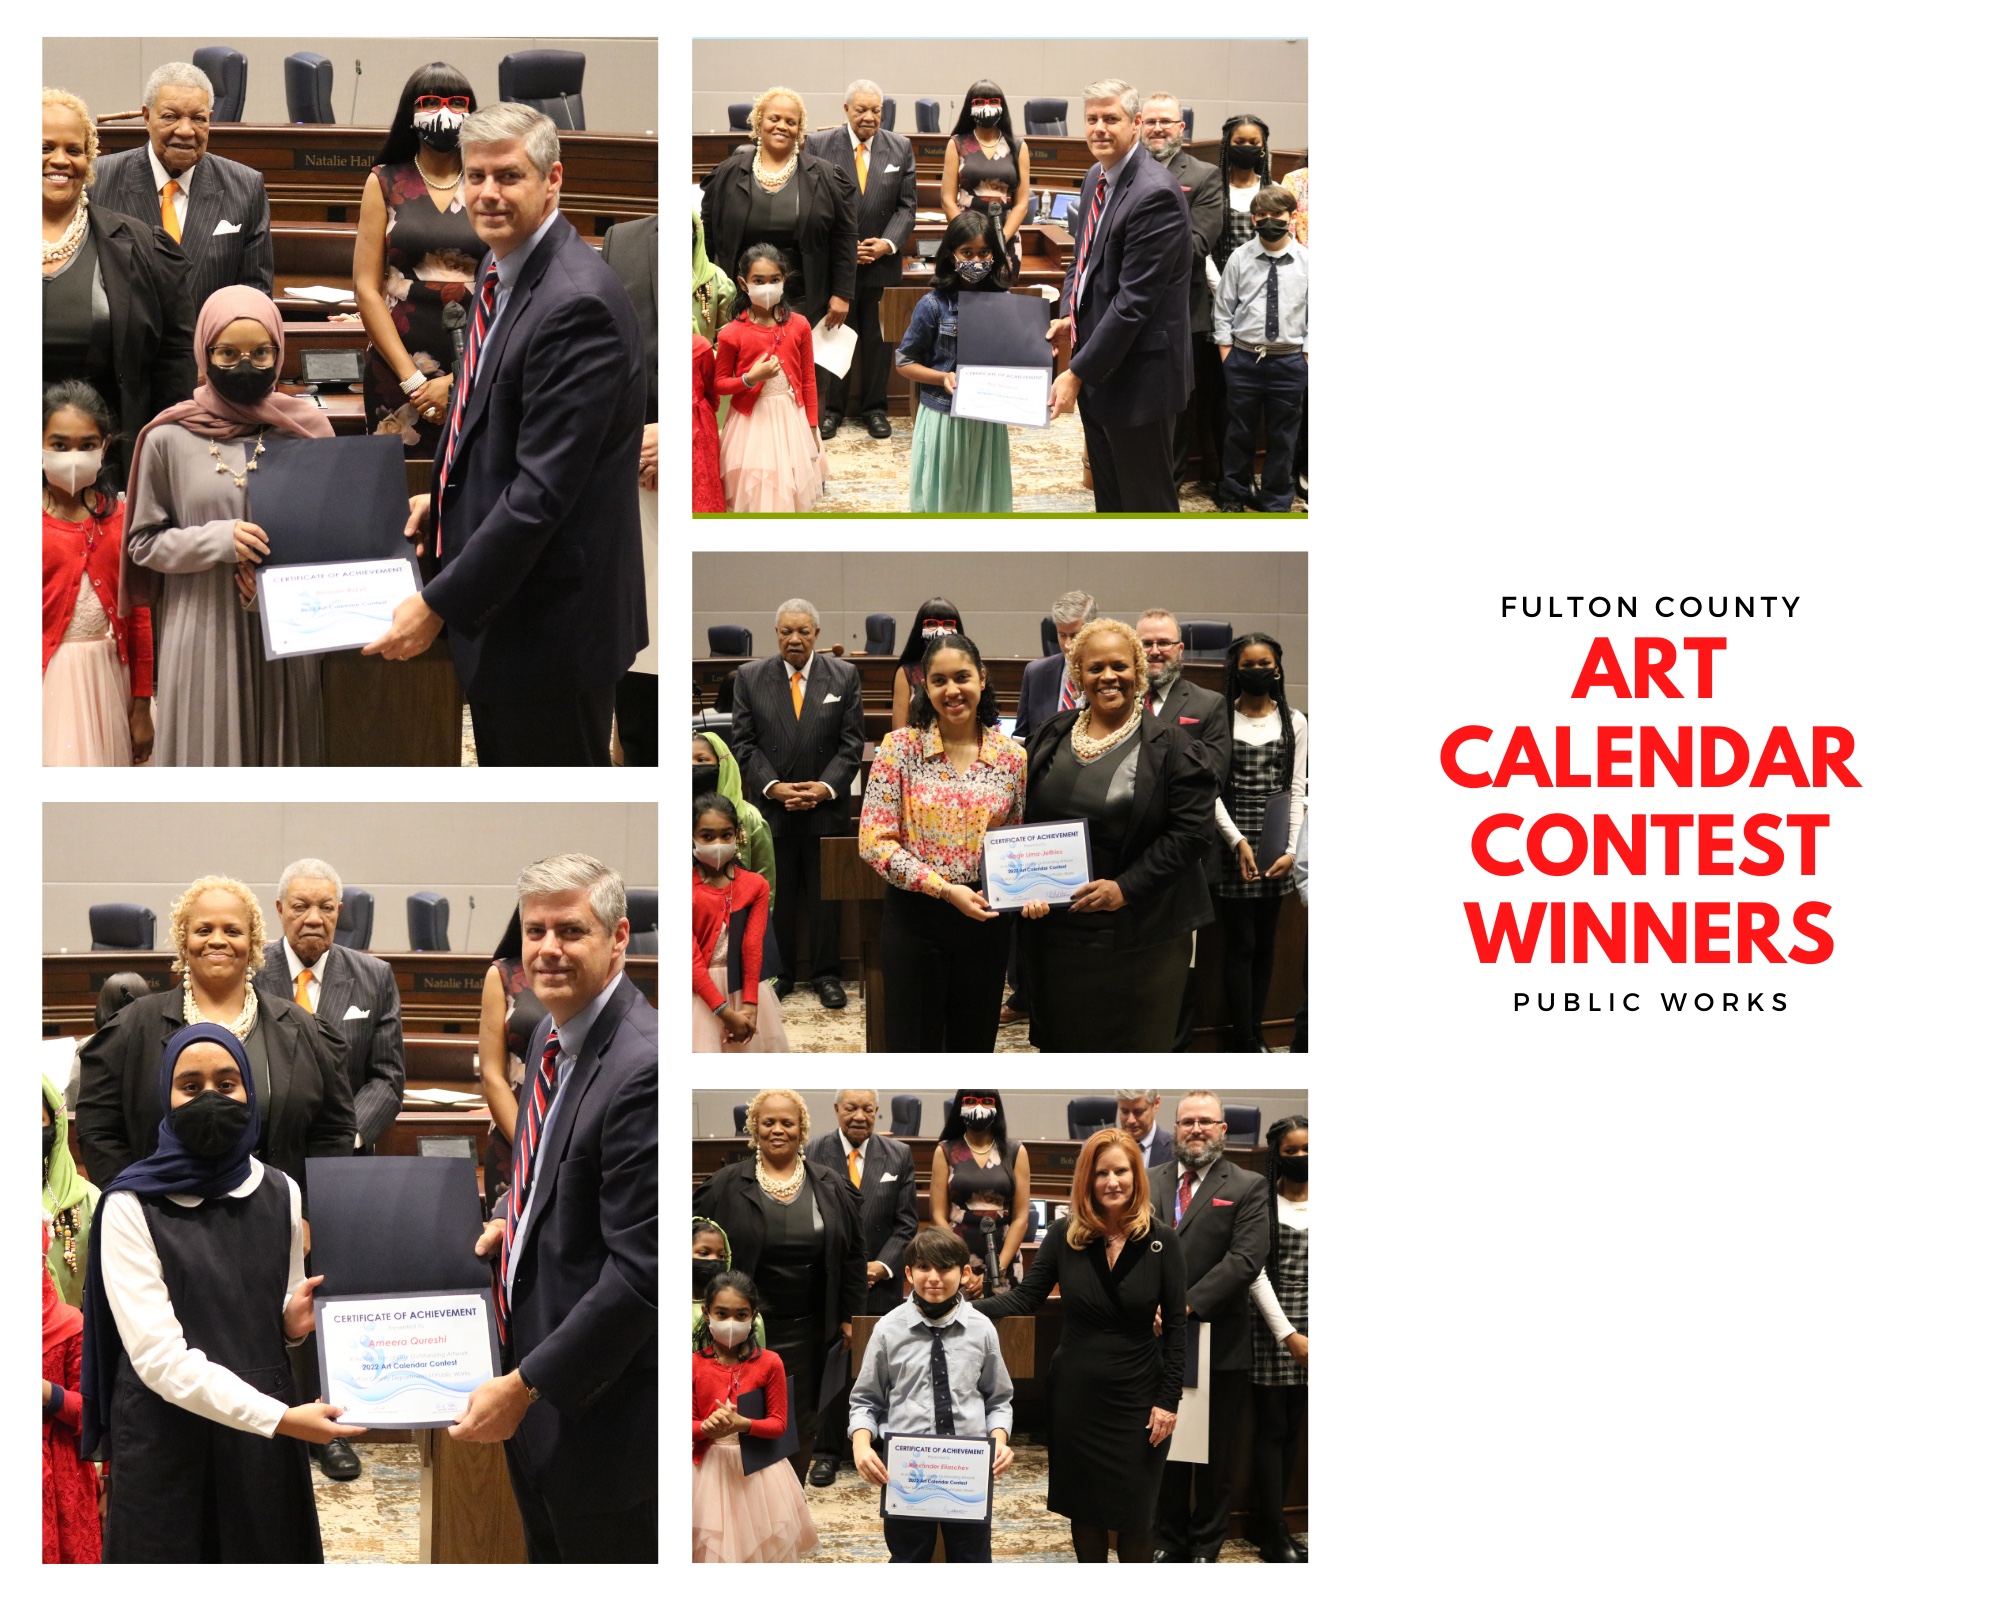 Fulton County Calendar 2022 Fultoncountygeorgia On Twitter: "The Fulton County Department Of Public  Works Would Like To Congratulate The Winners Of Our Annual Art Calendar  Contest! This Year, Students Created Artwork Which Connected To Our 2022